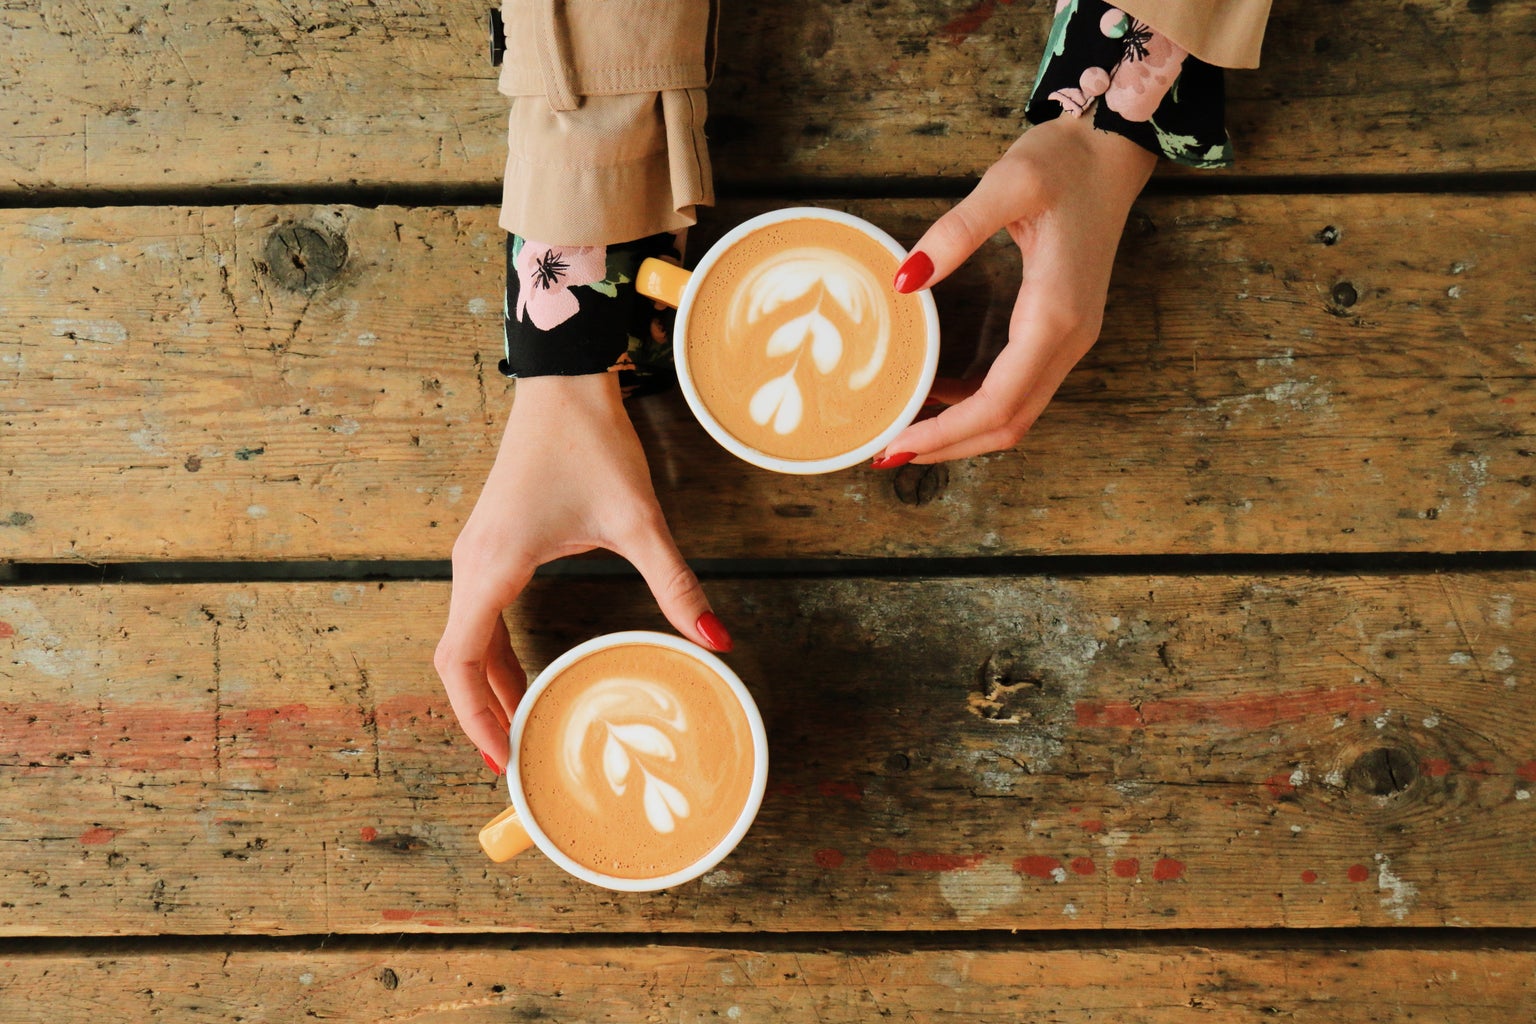 two hands belonging to a single person reaching for two coffee cups on a table